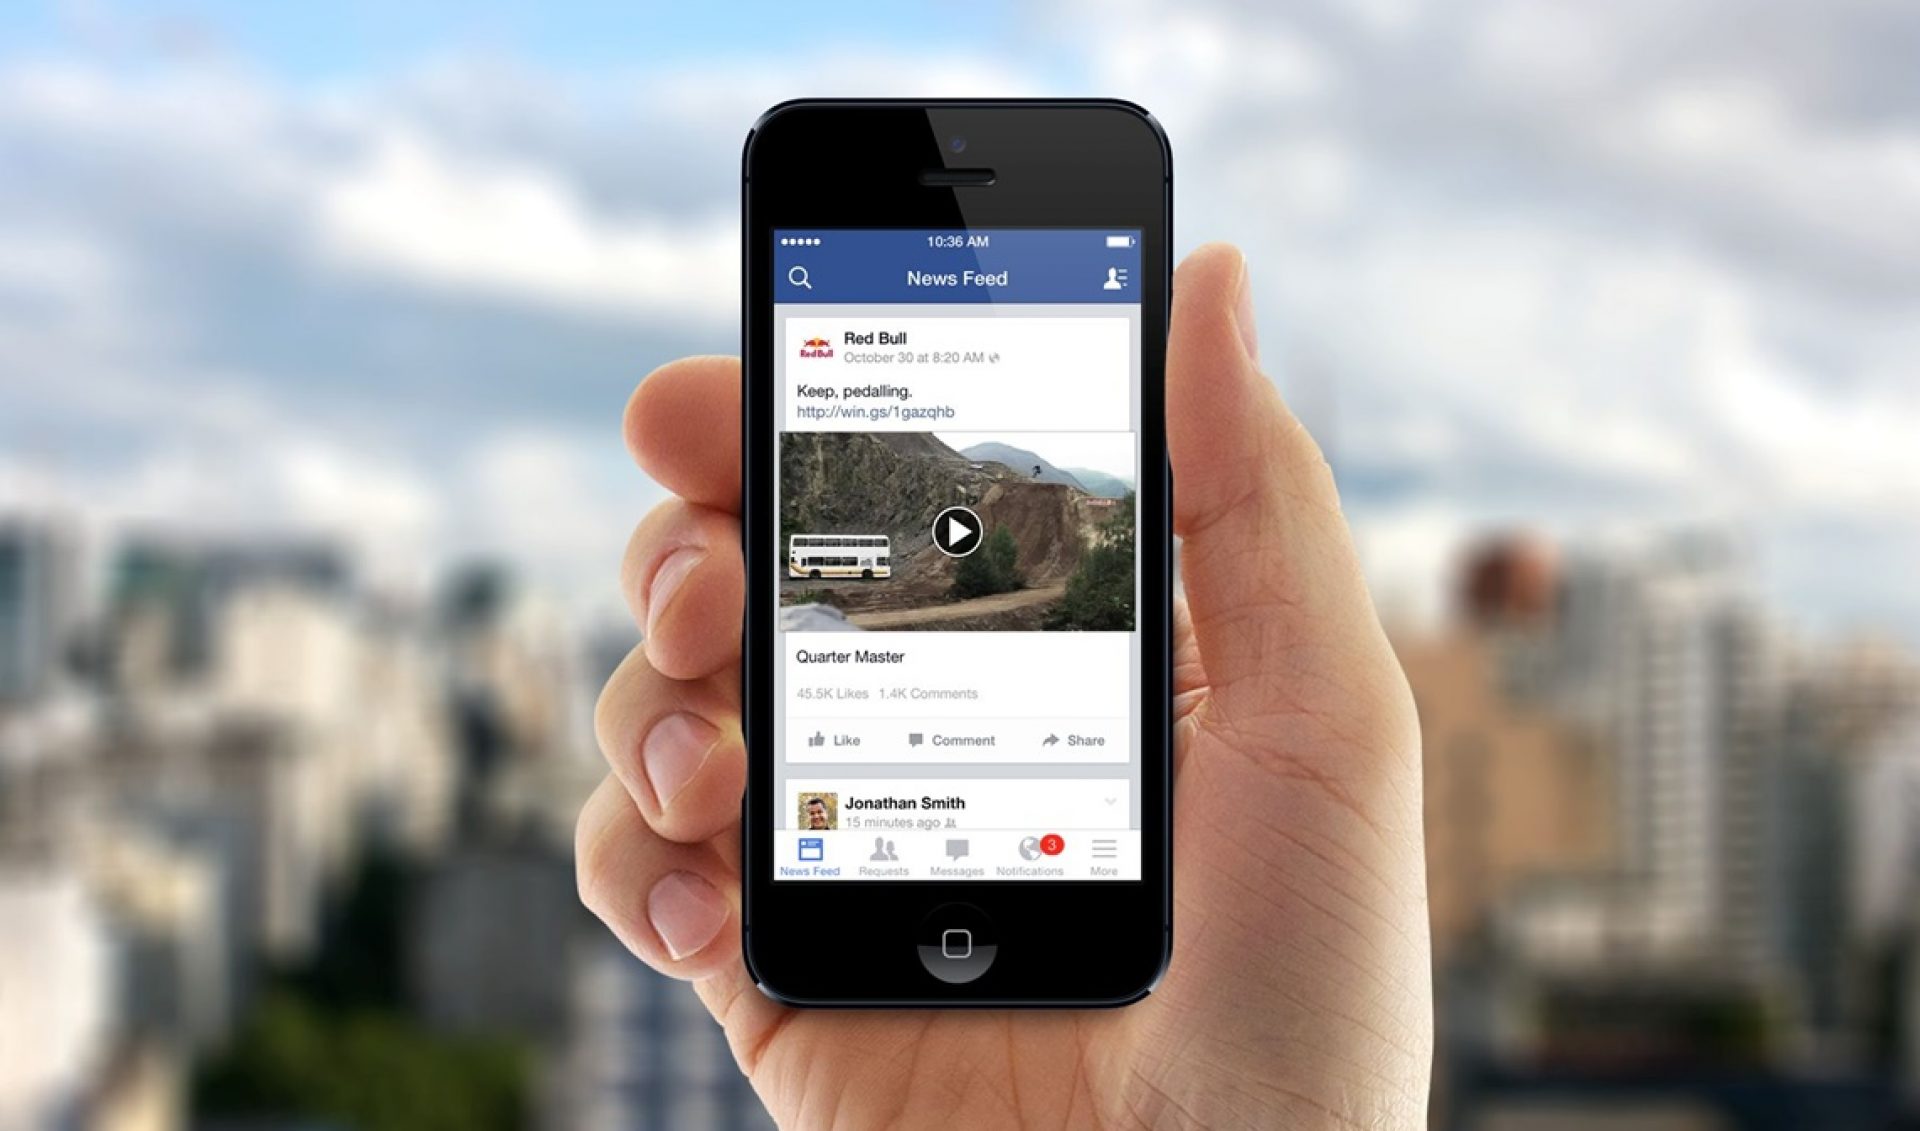 Facebook Live Video Viewership, Production Reportedly Flatlining In The U.K.